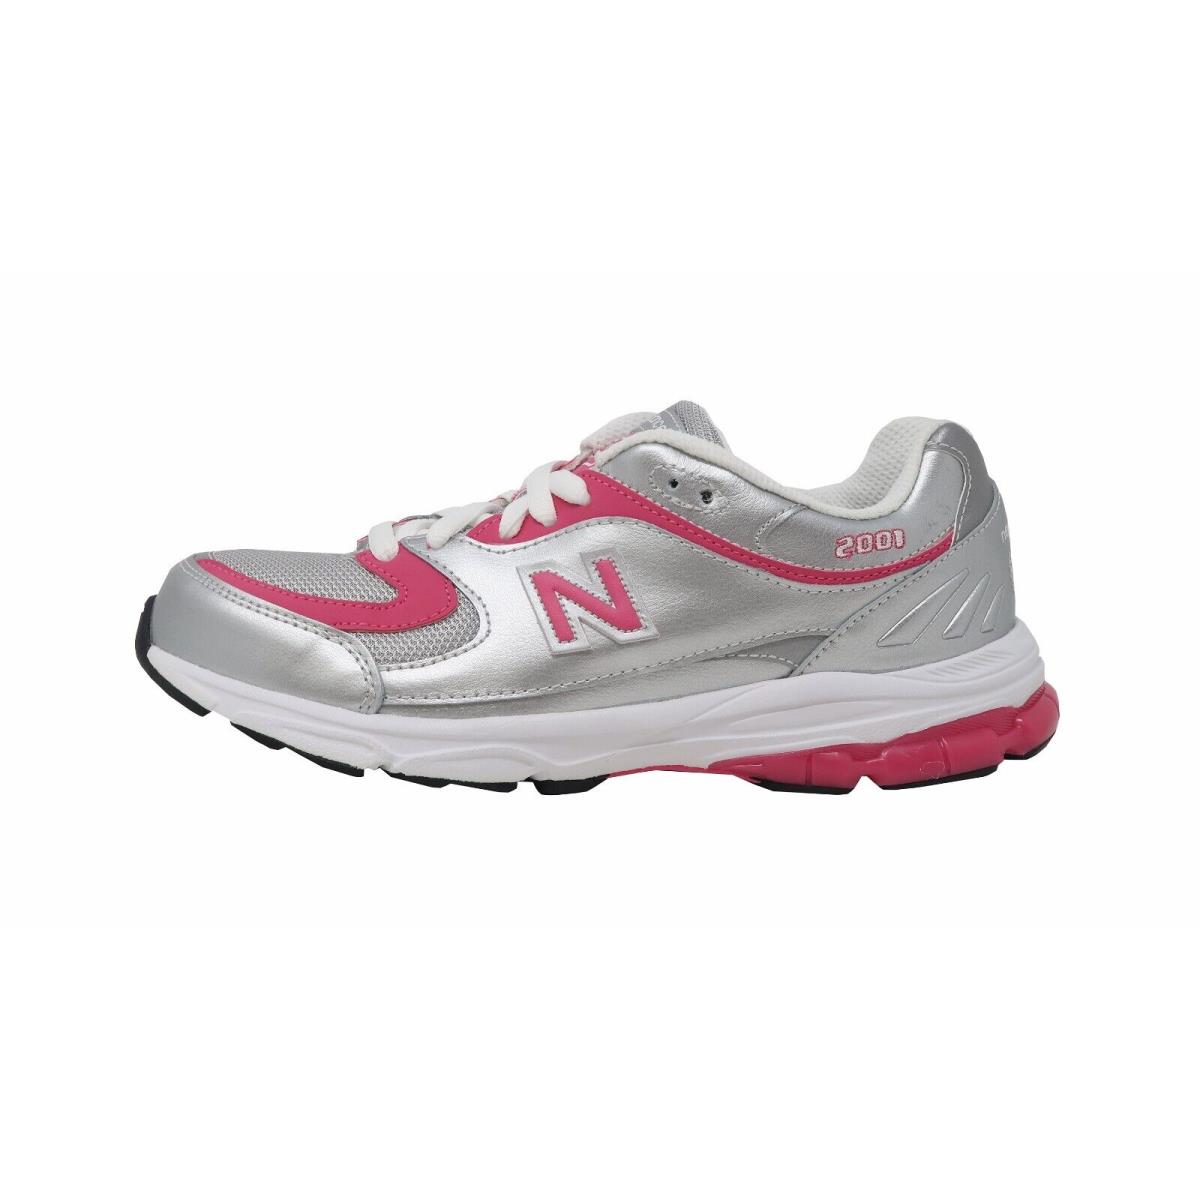 New Balance Classic Big Kids Running Shoes Sneakers K2001GPG - Silver/pink